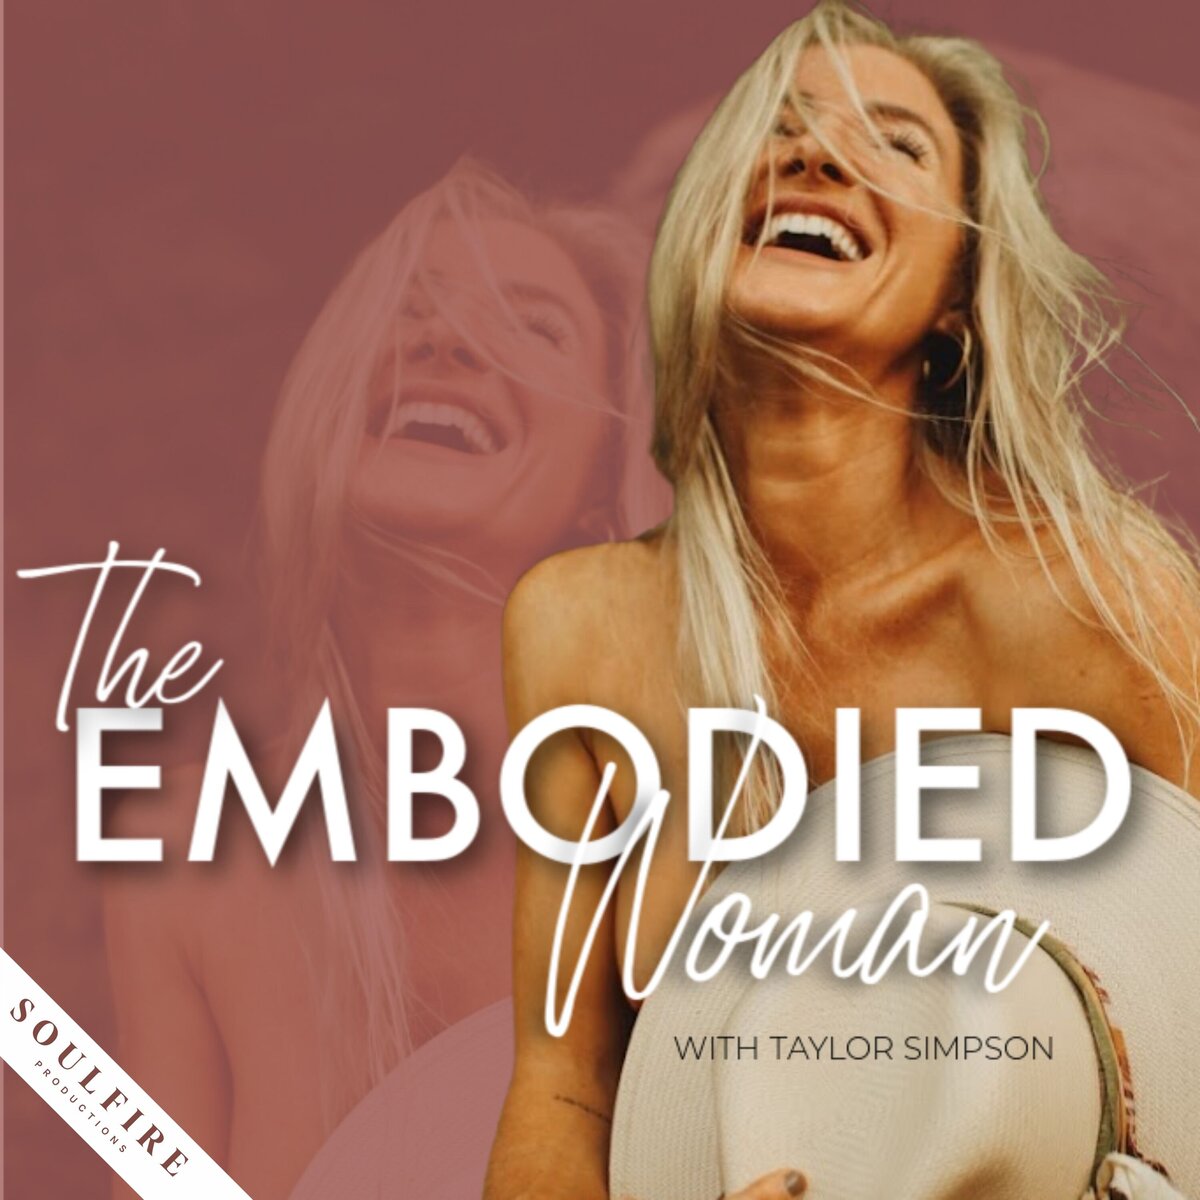 The Embodied Woman